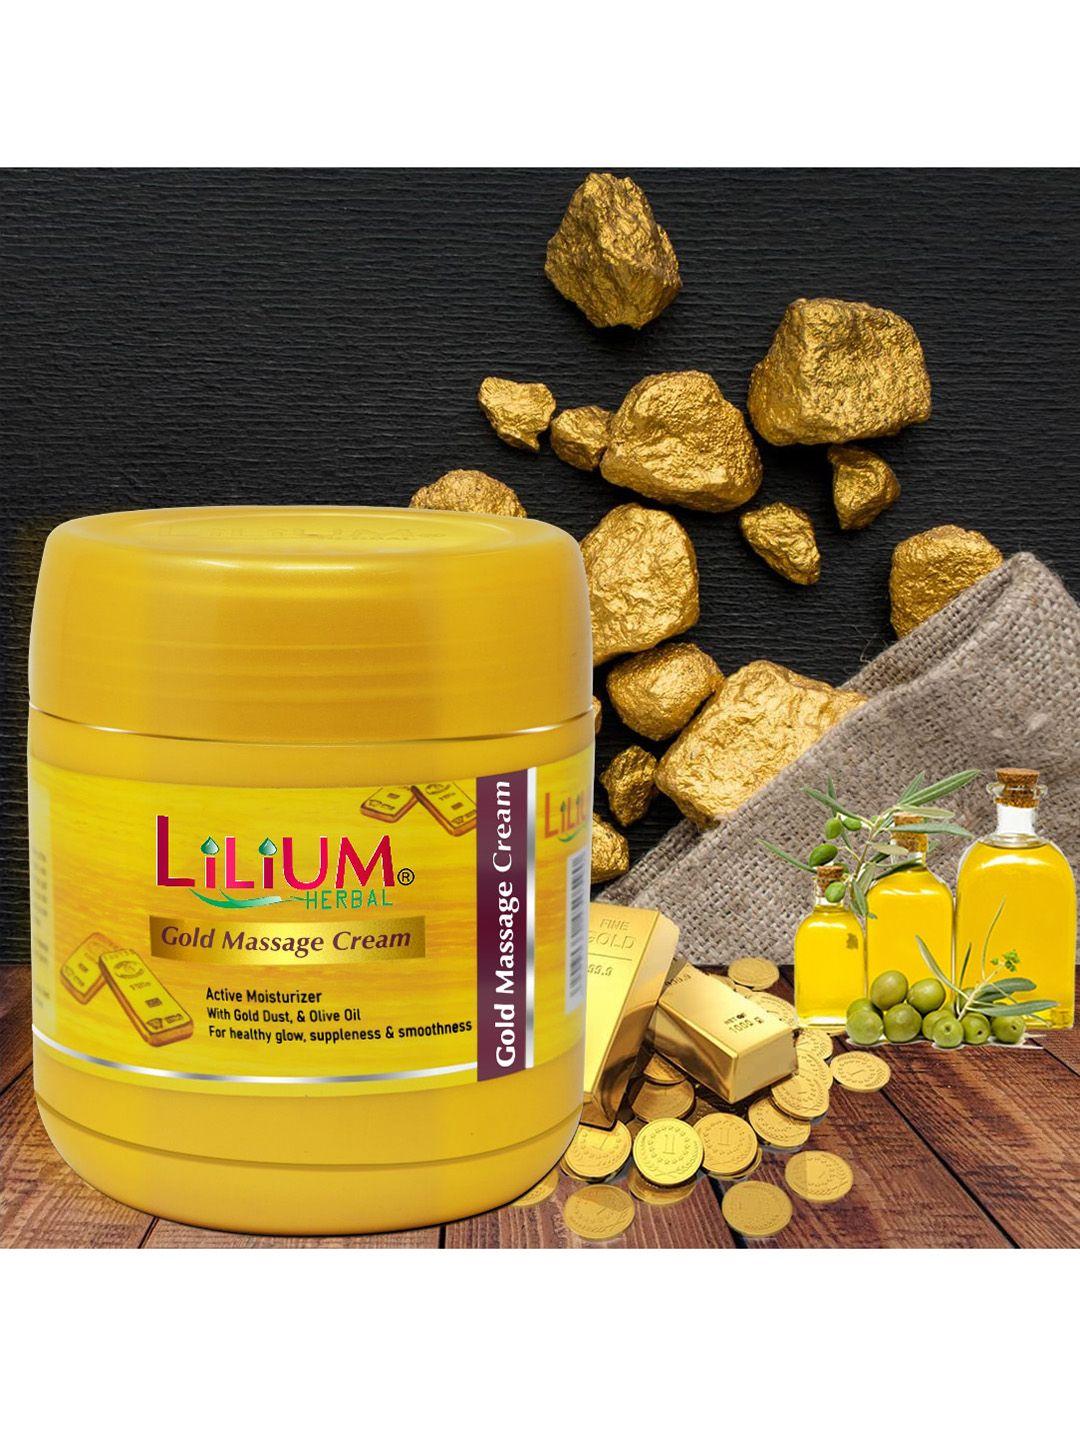 lilium set of 3 gold massage cream with gold dust & olive oil - 500 ml each